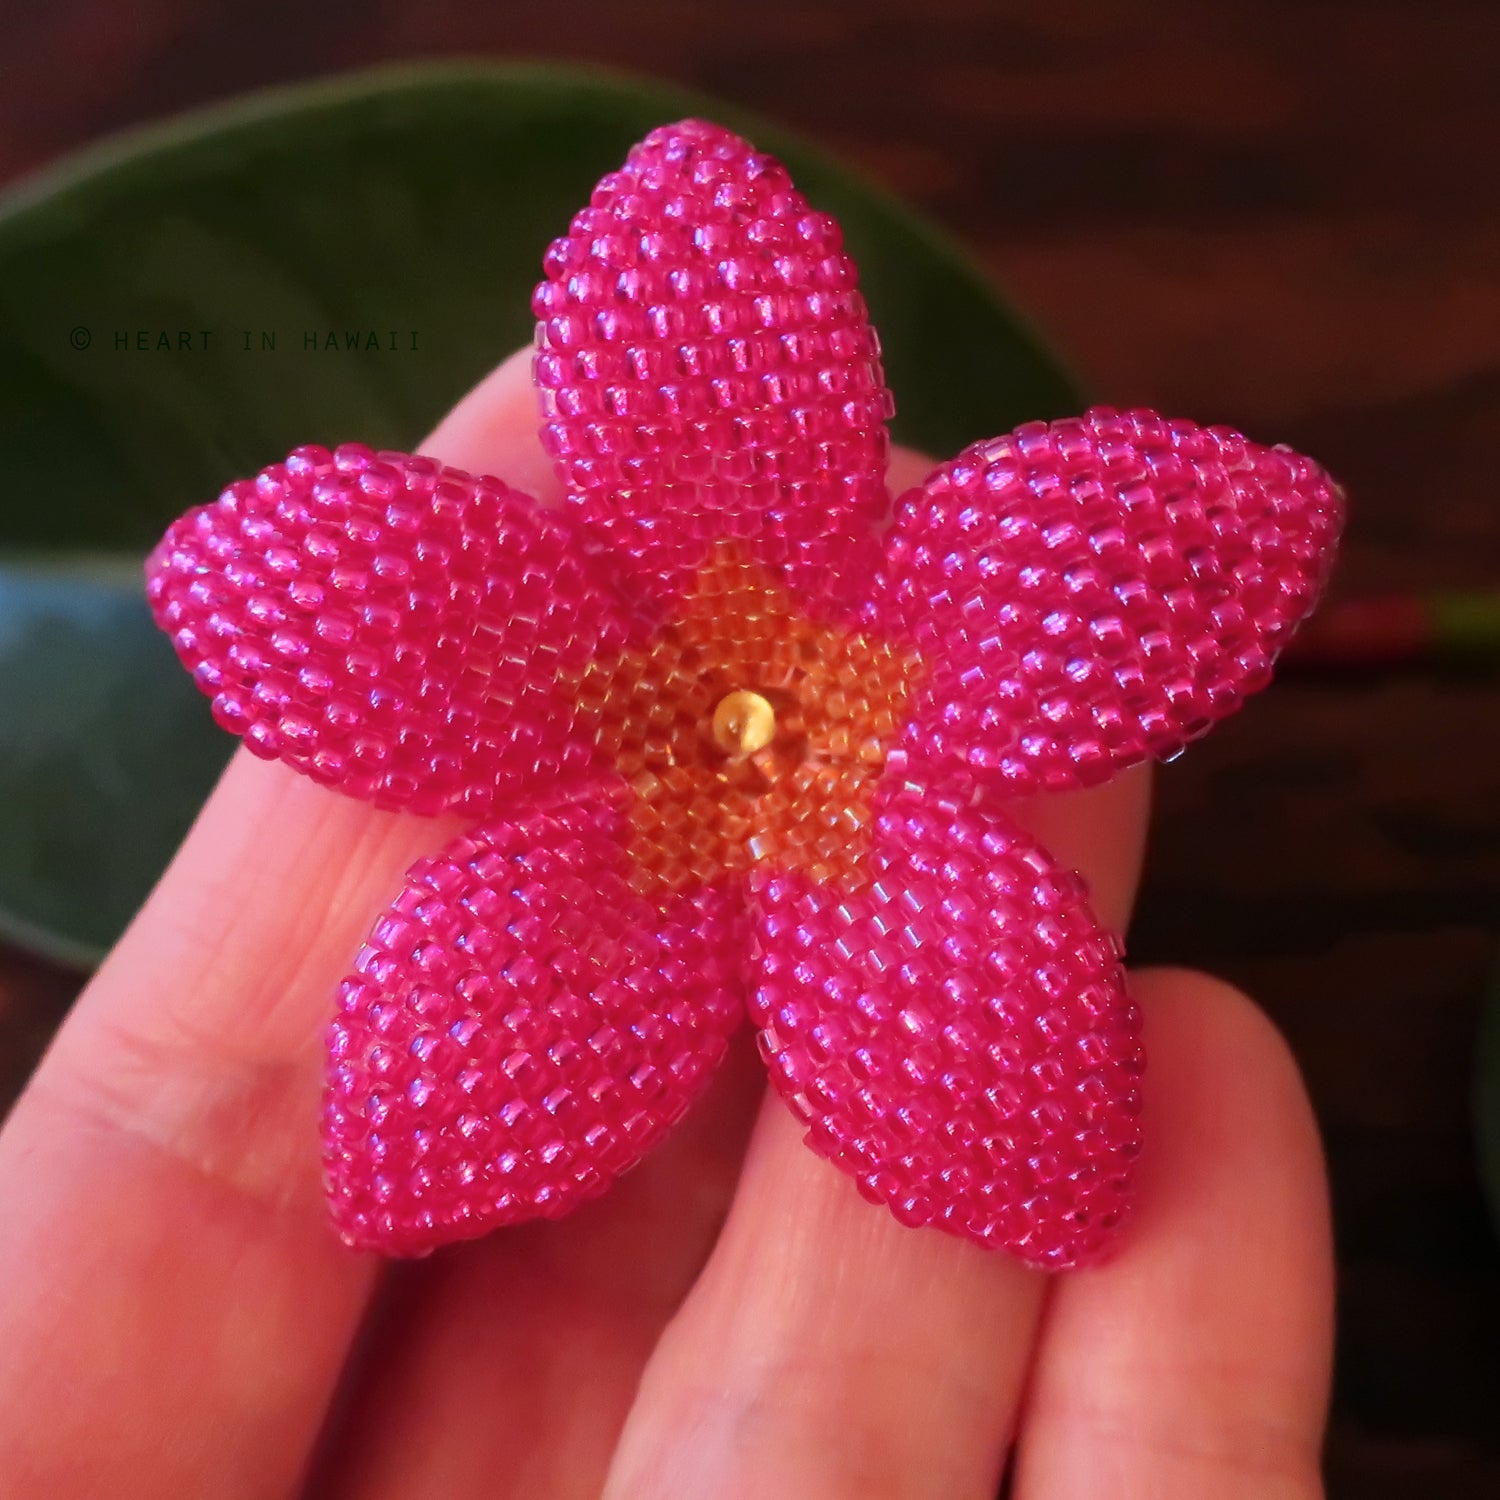 Heart in Hawaii 2 Inch Beaded Plumeria Flower Brooch - Hot pink with Topaz